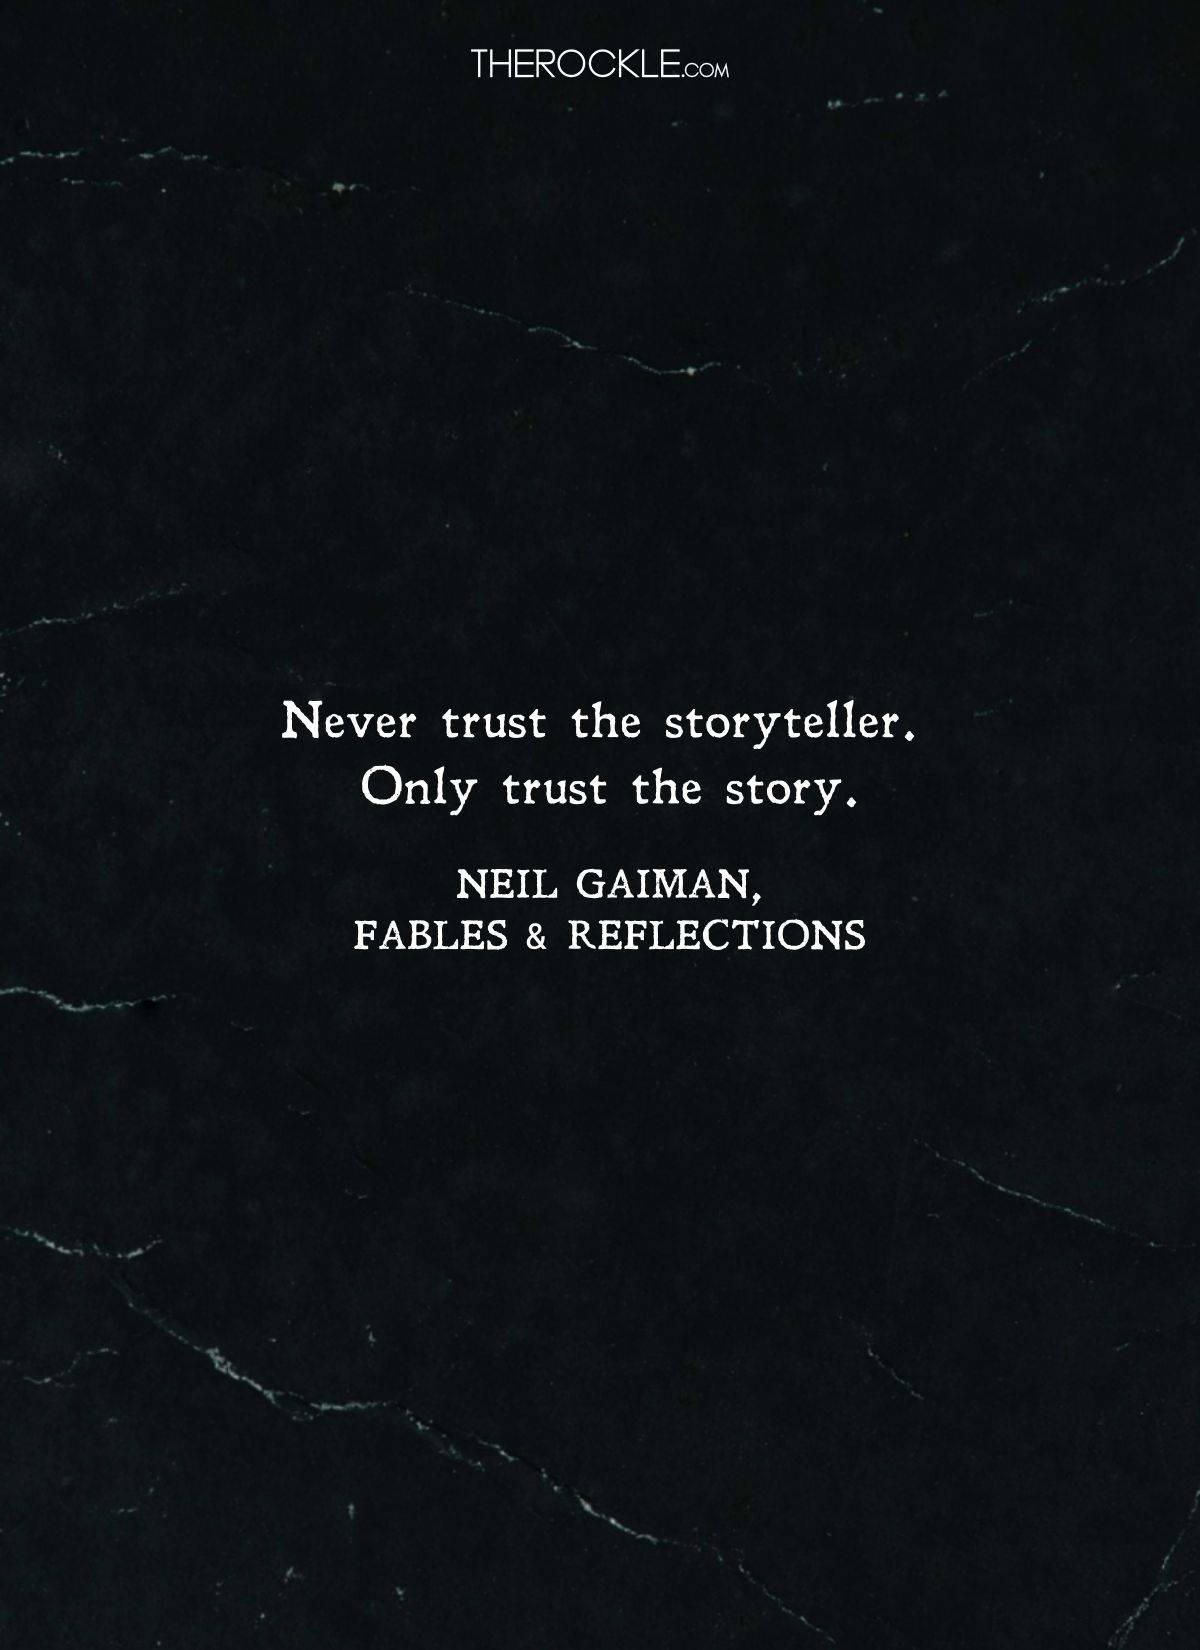 Neil Gaiman quote on unreliable storytellers